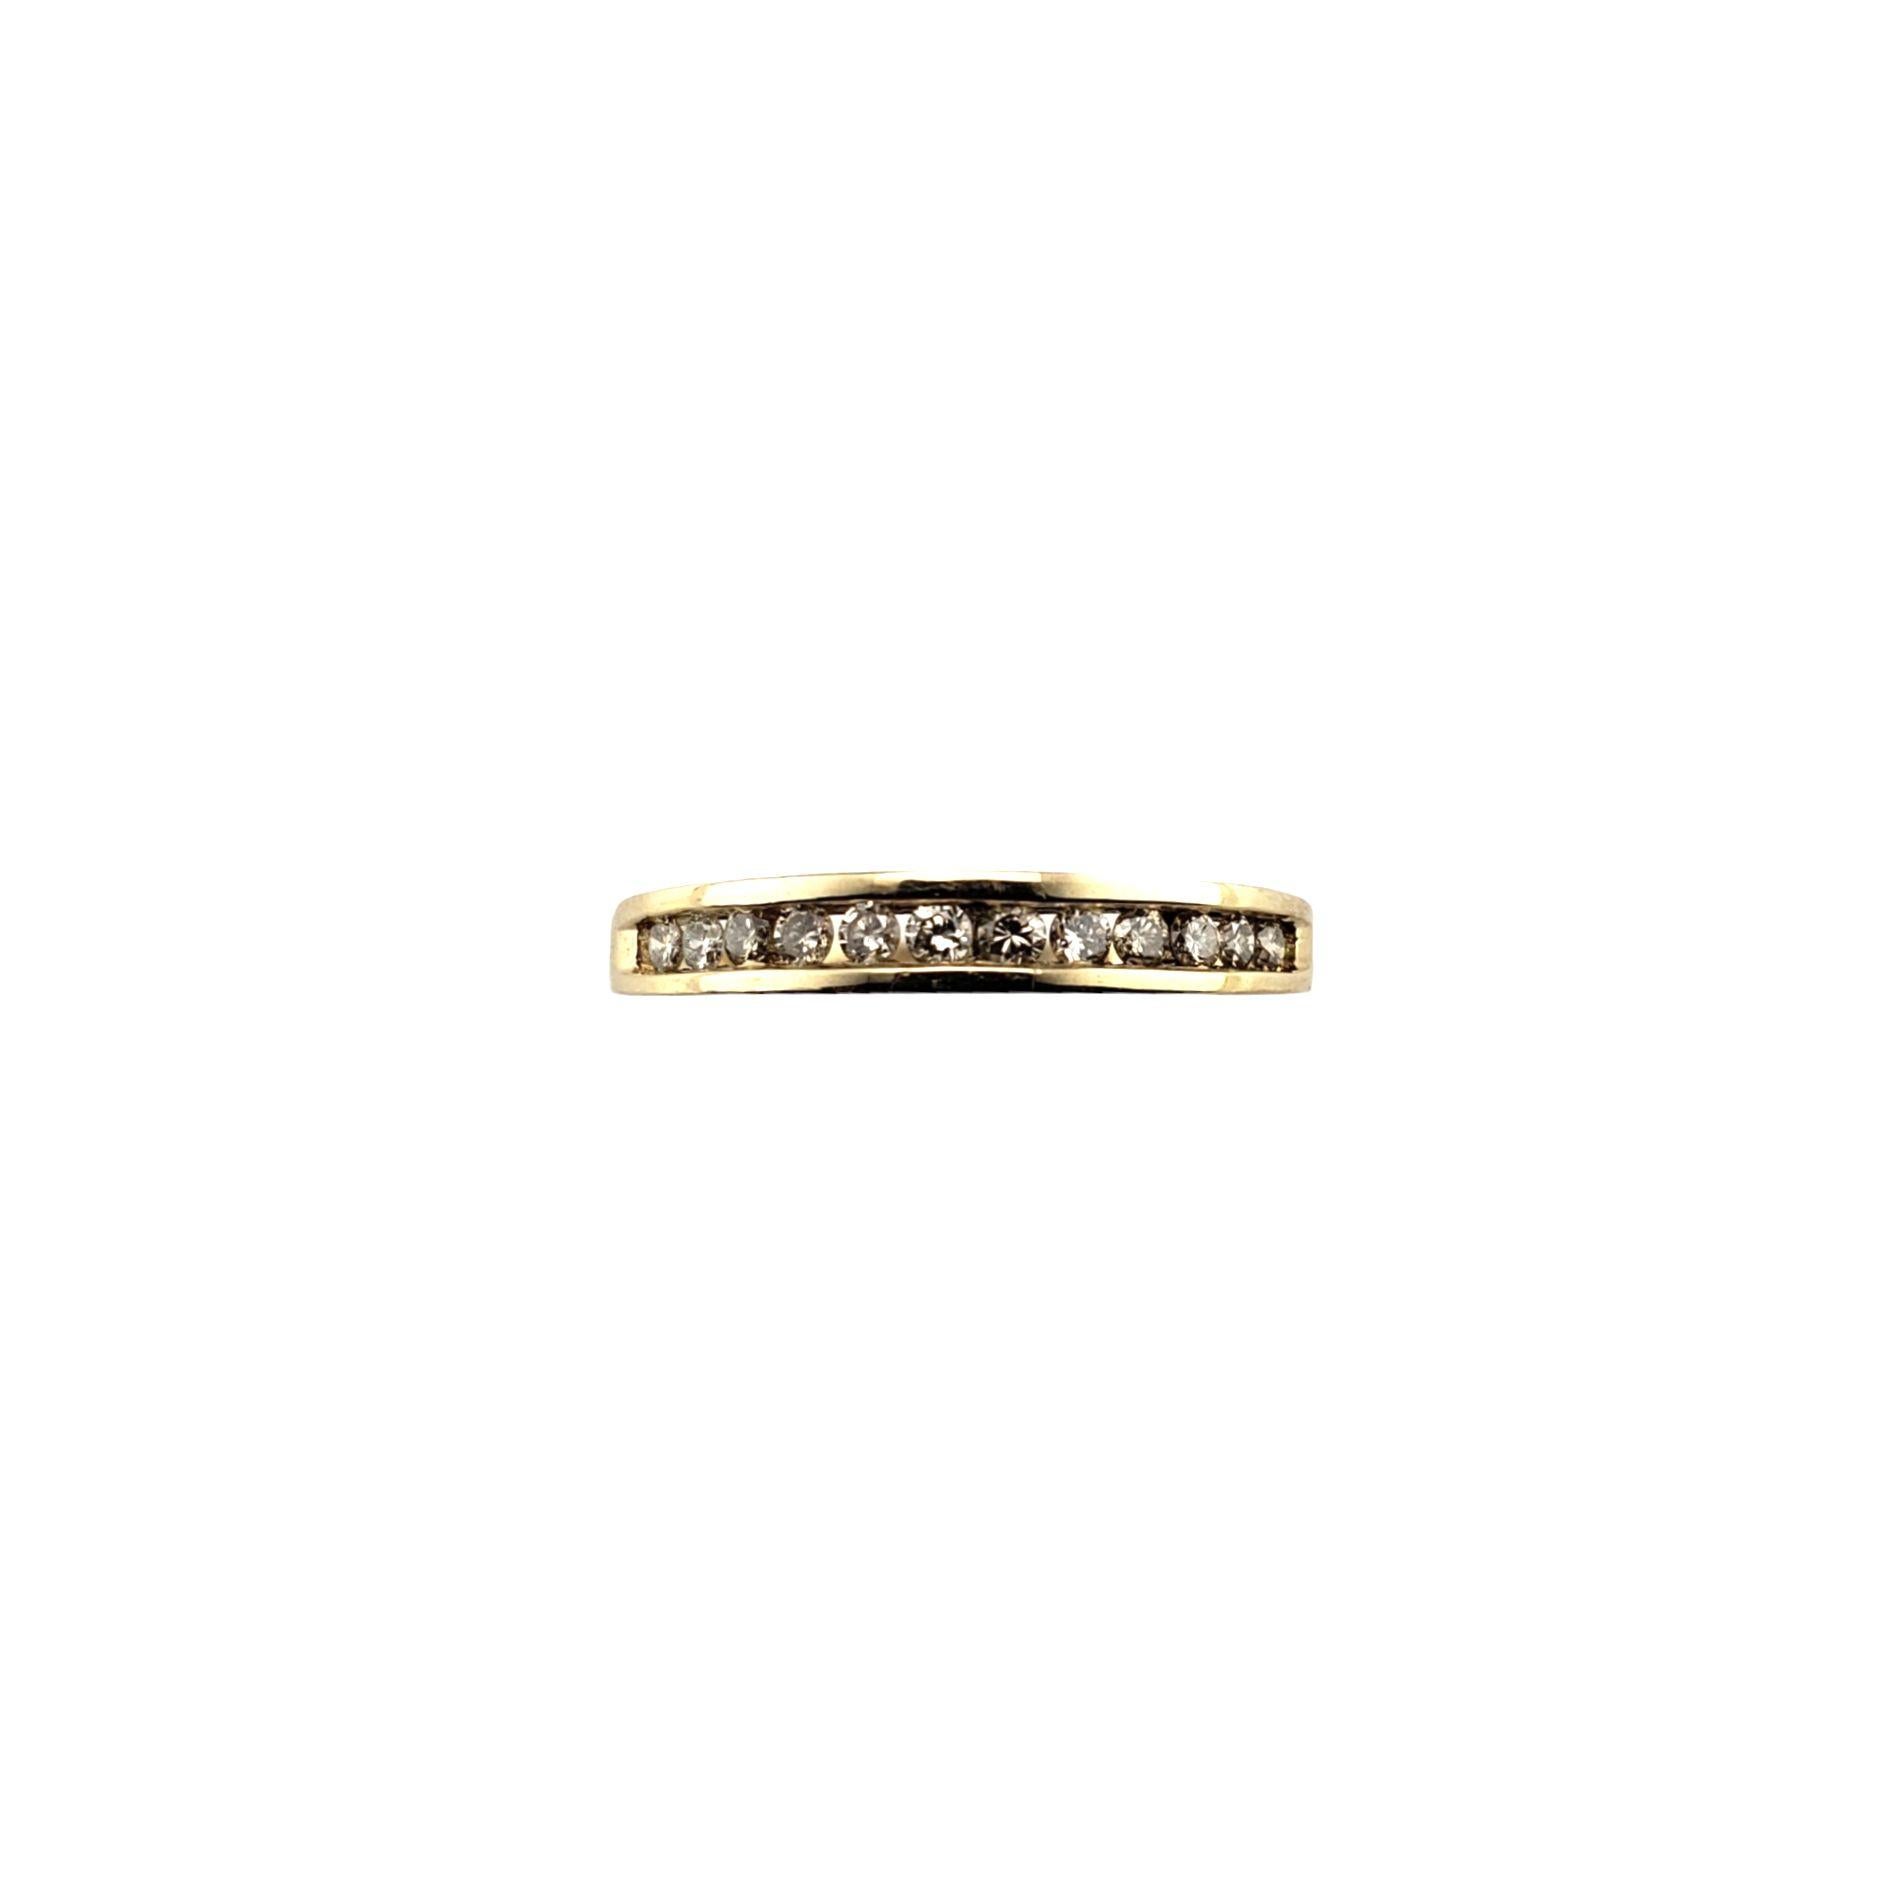 Vintage 14 Karat Yellow Gold Diamond Band Ring Size 6.75-

This sparkling band features 12 round brilliant cut diamonds set in 14K yellow gold. Width: 3 mm. Shank: 2 mm.

Approximate total diamond weight: .24 ct.

Diamond clarity: SI1-I1

Diamond